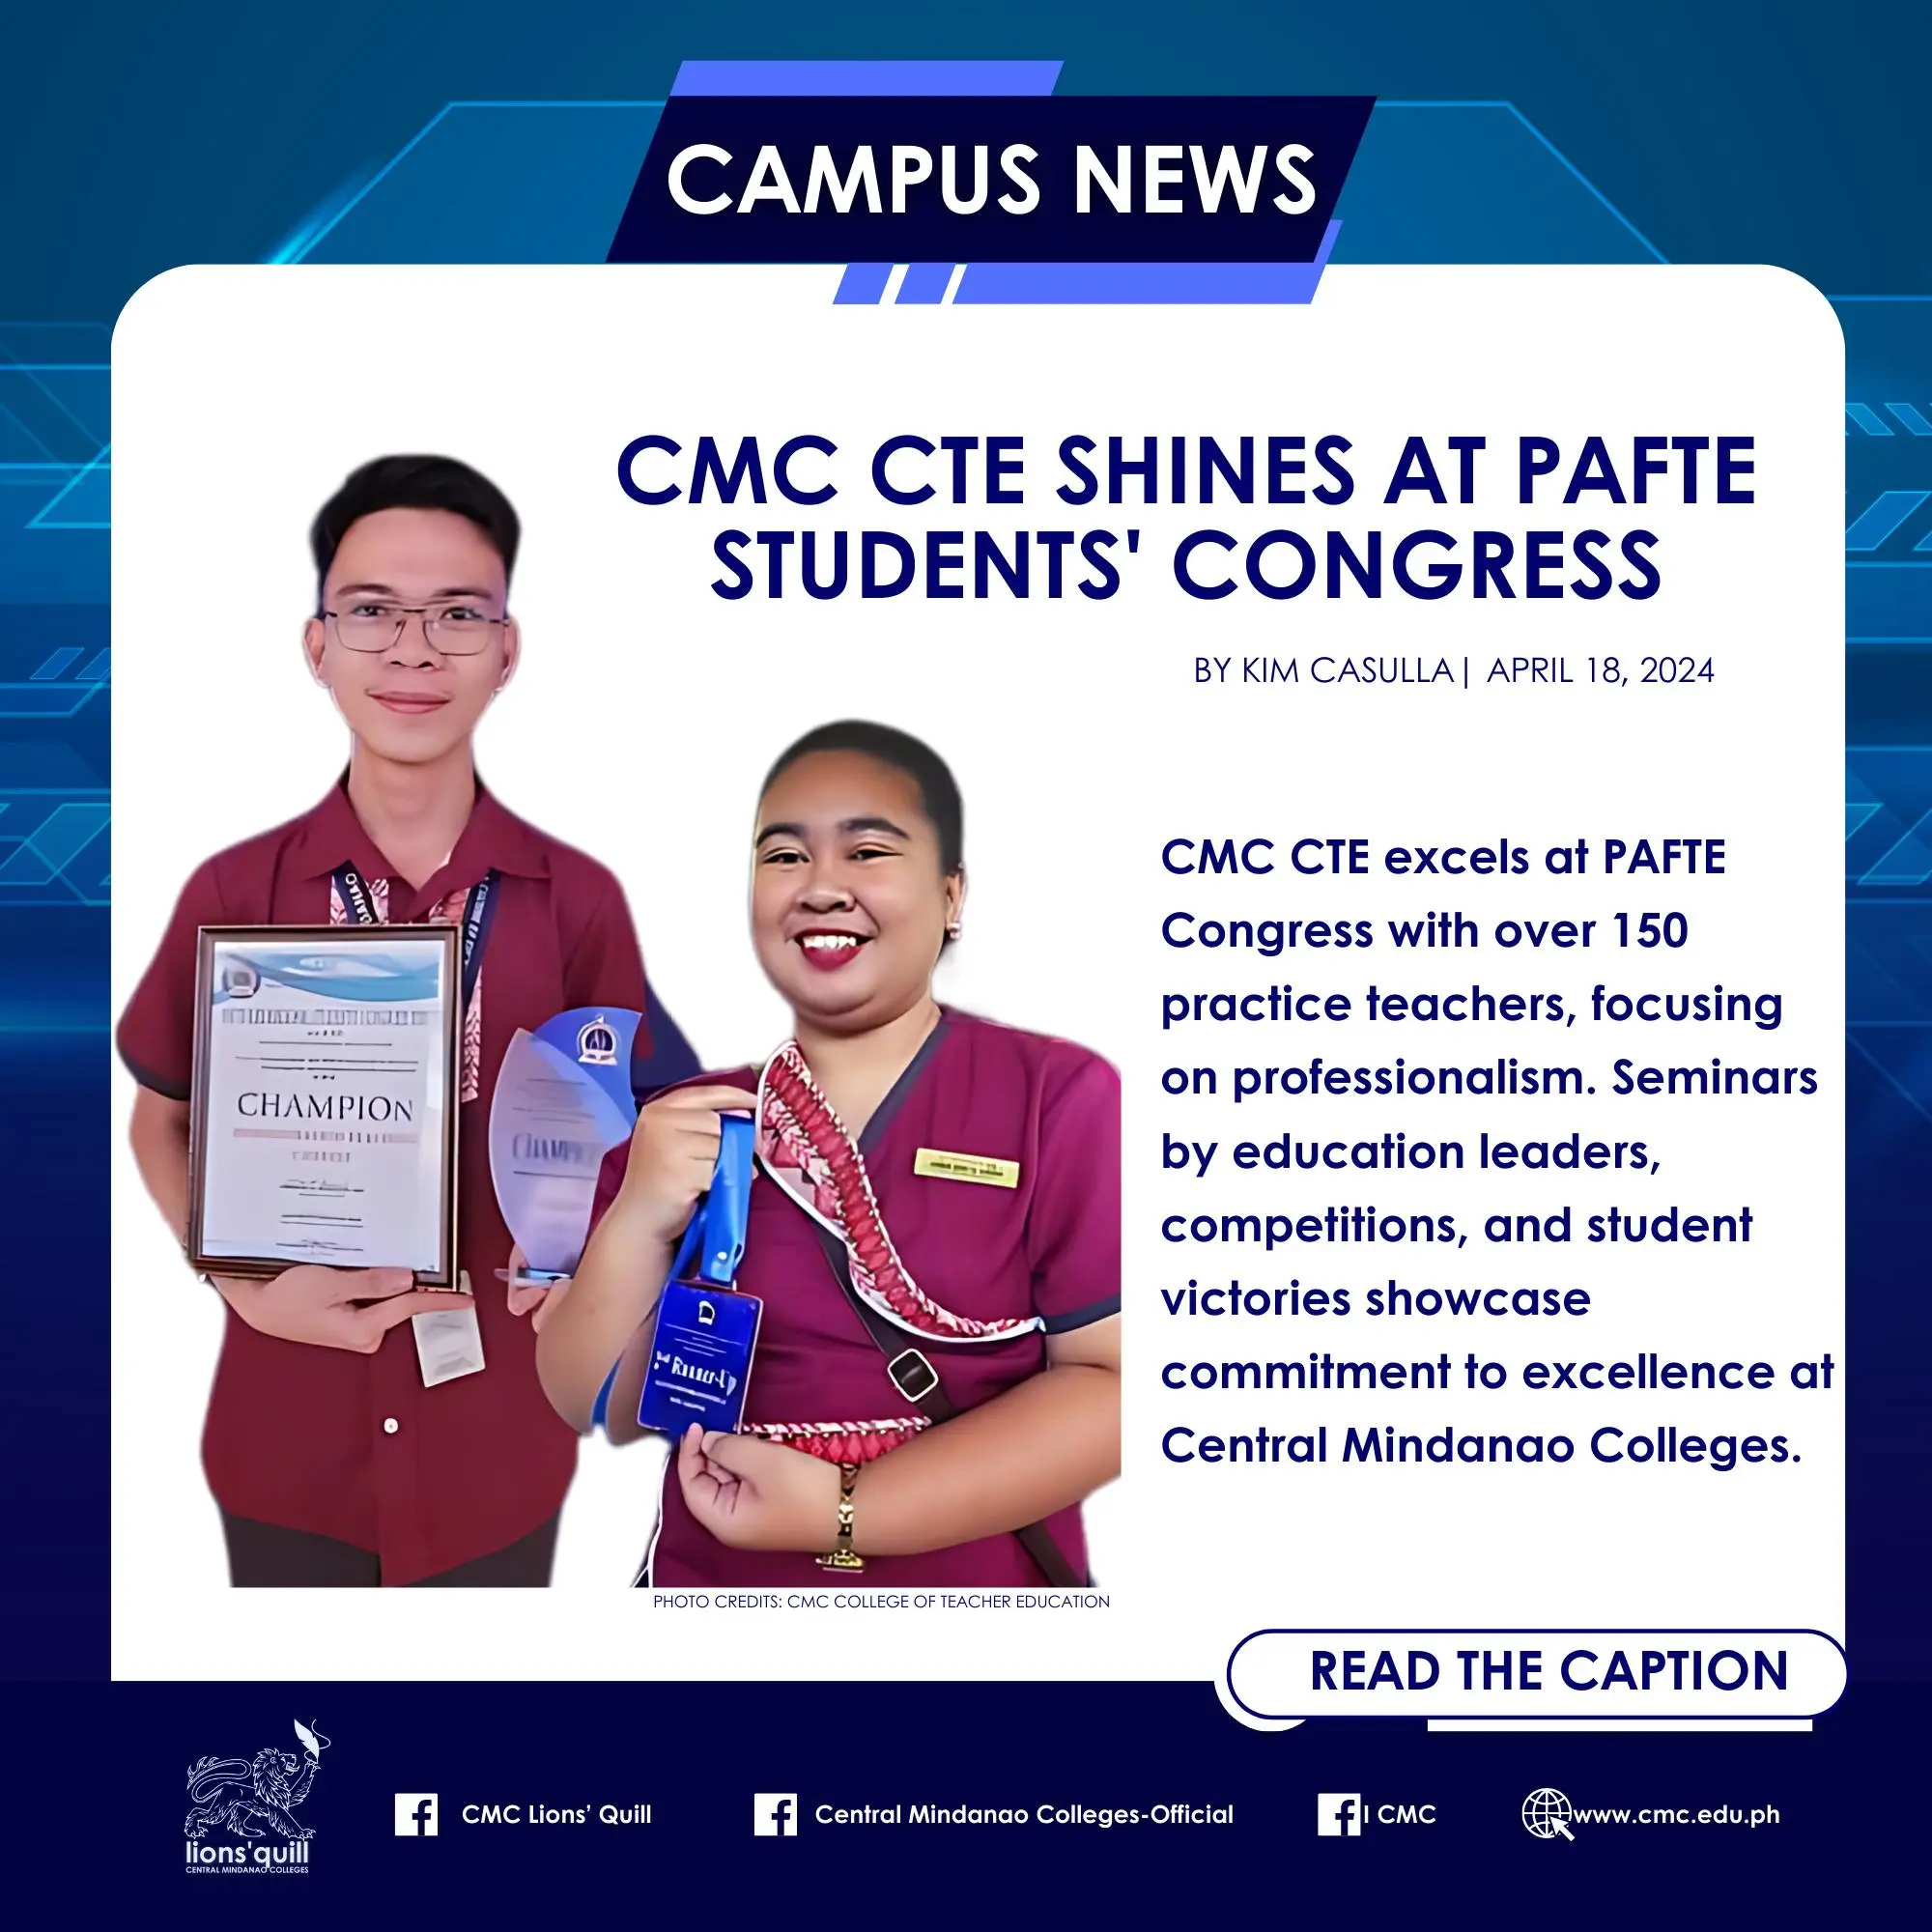 CMC CTE Shines at PAFTE Students’ Congress